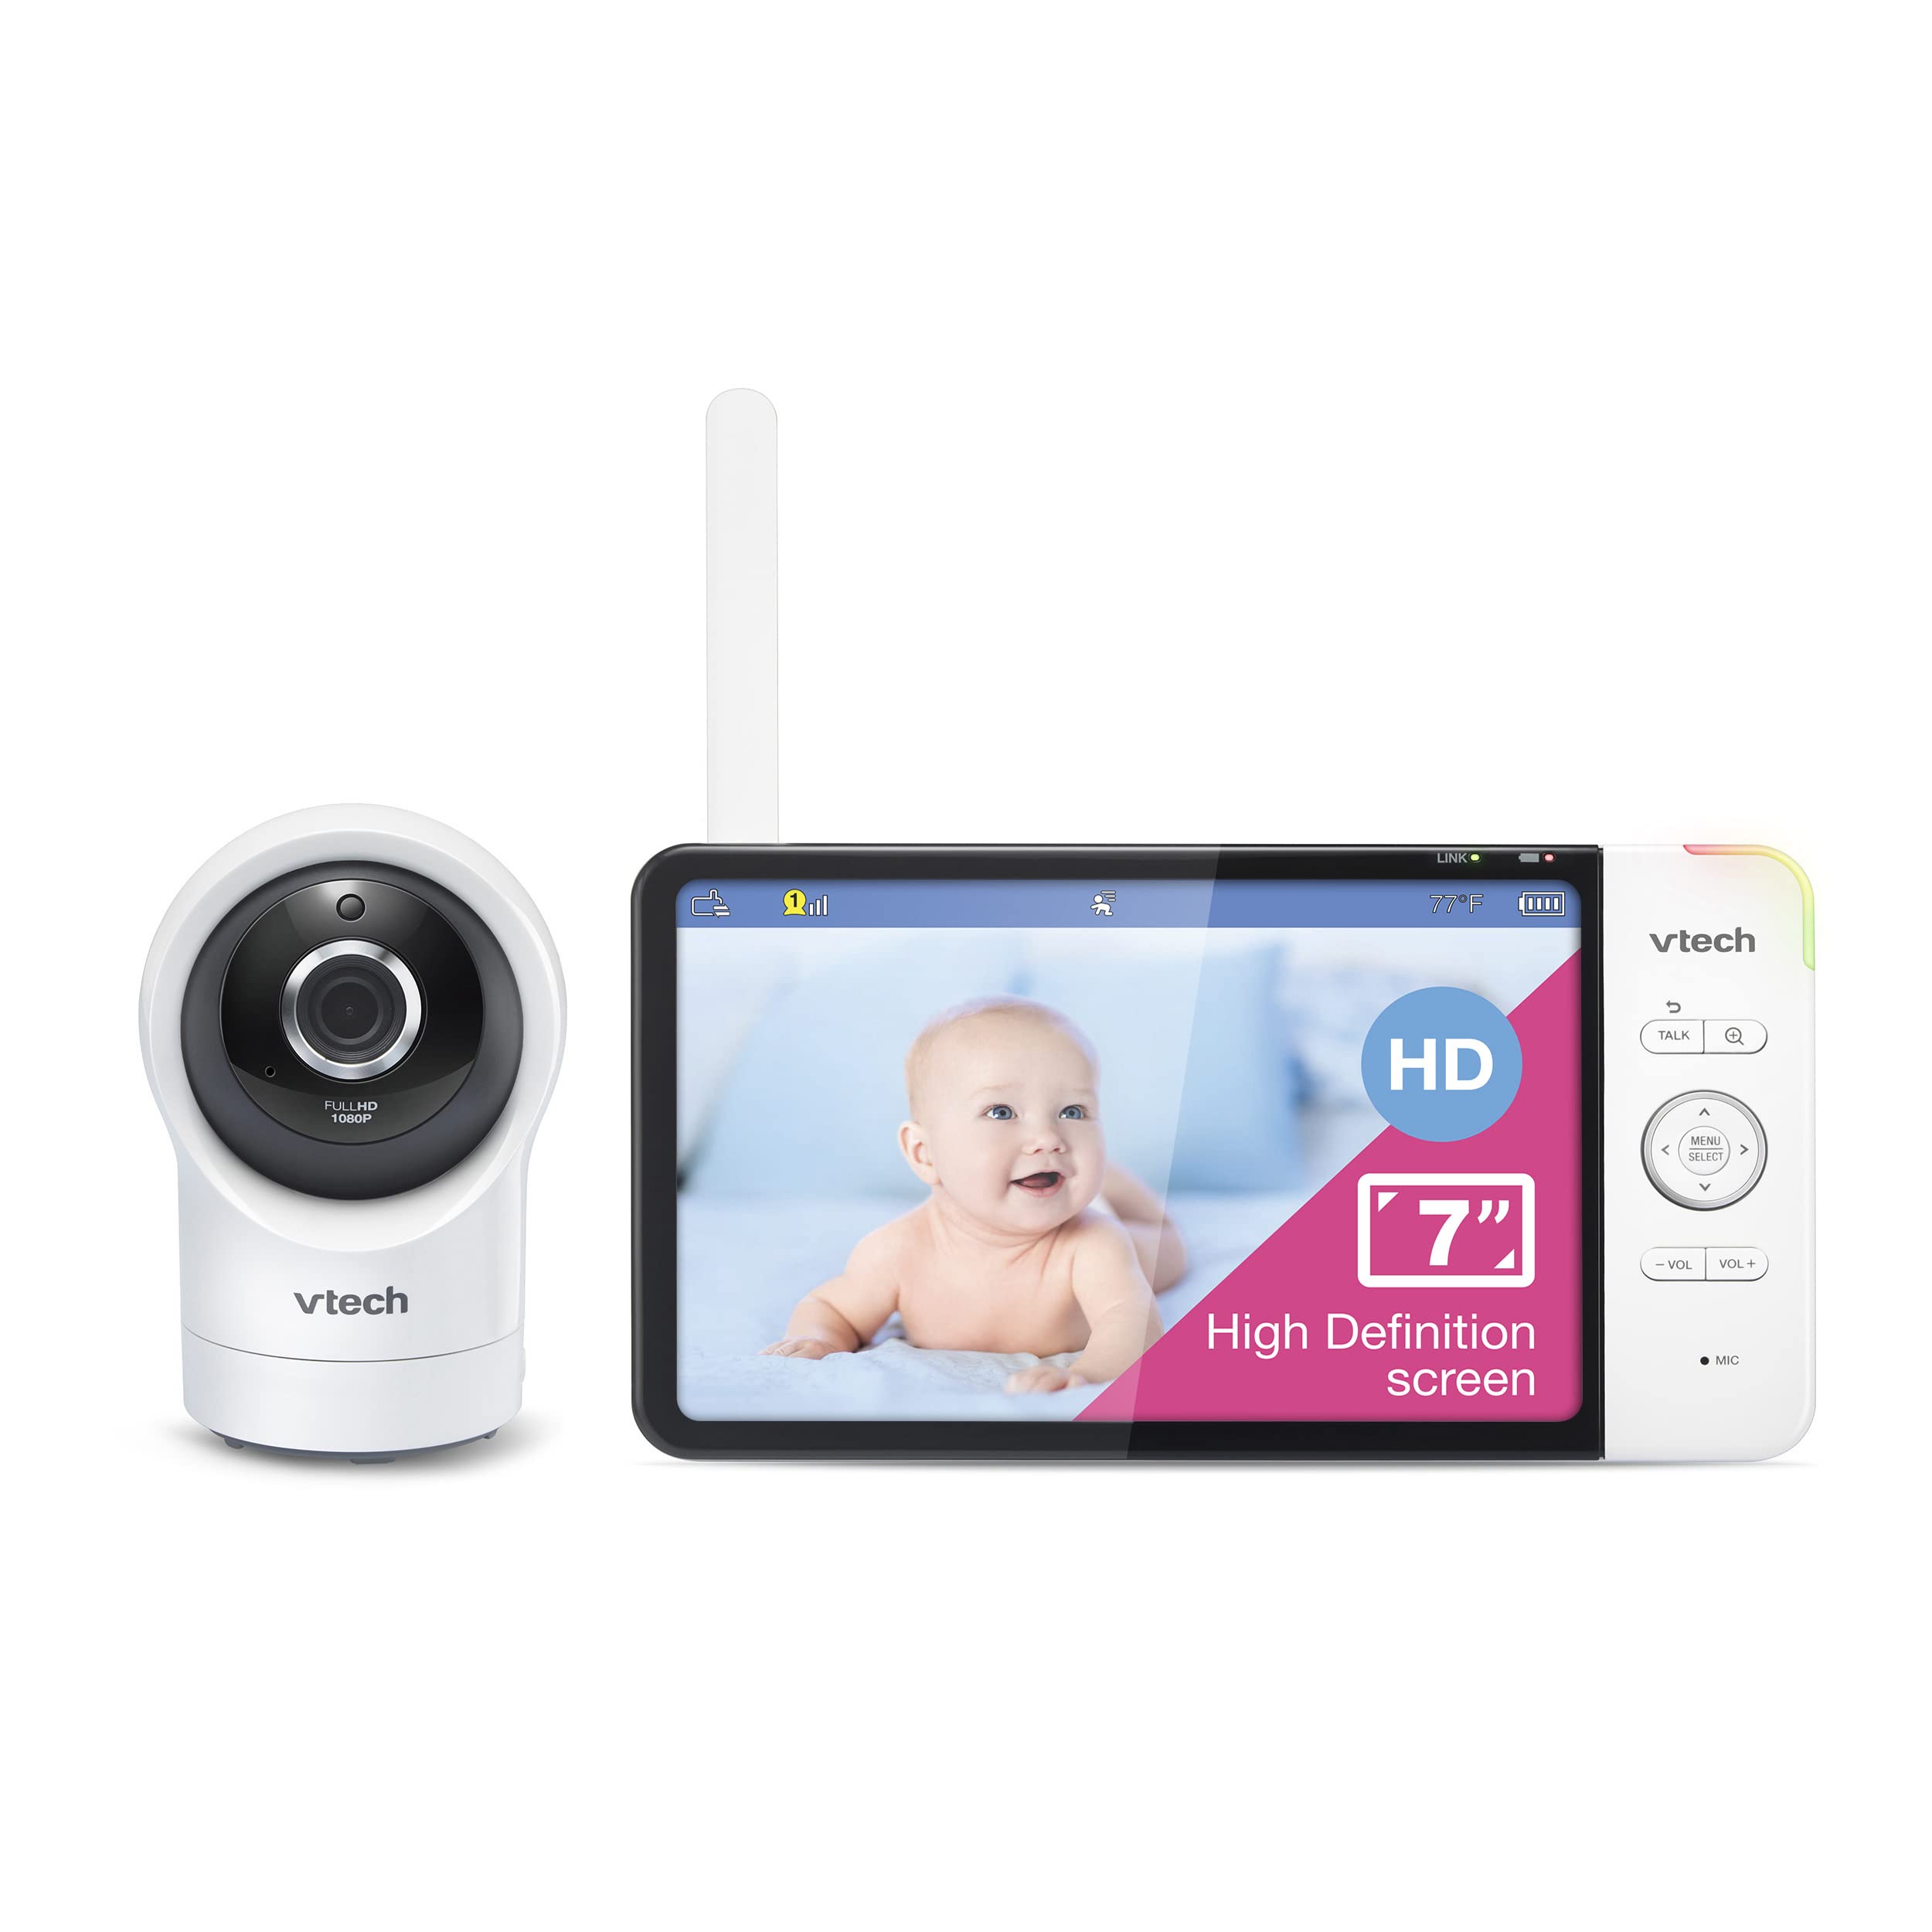 VTech RM7764HD 1080p WiFi Remote Access Baby Monitor 360 PanTilt 7 720p HD Display HD Night Vision Soothing Sounds